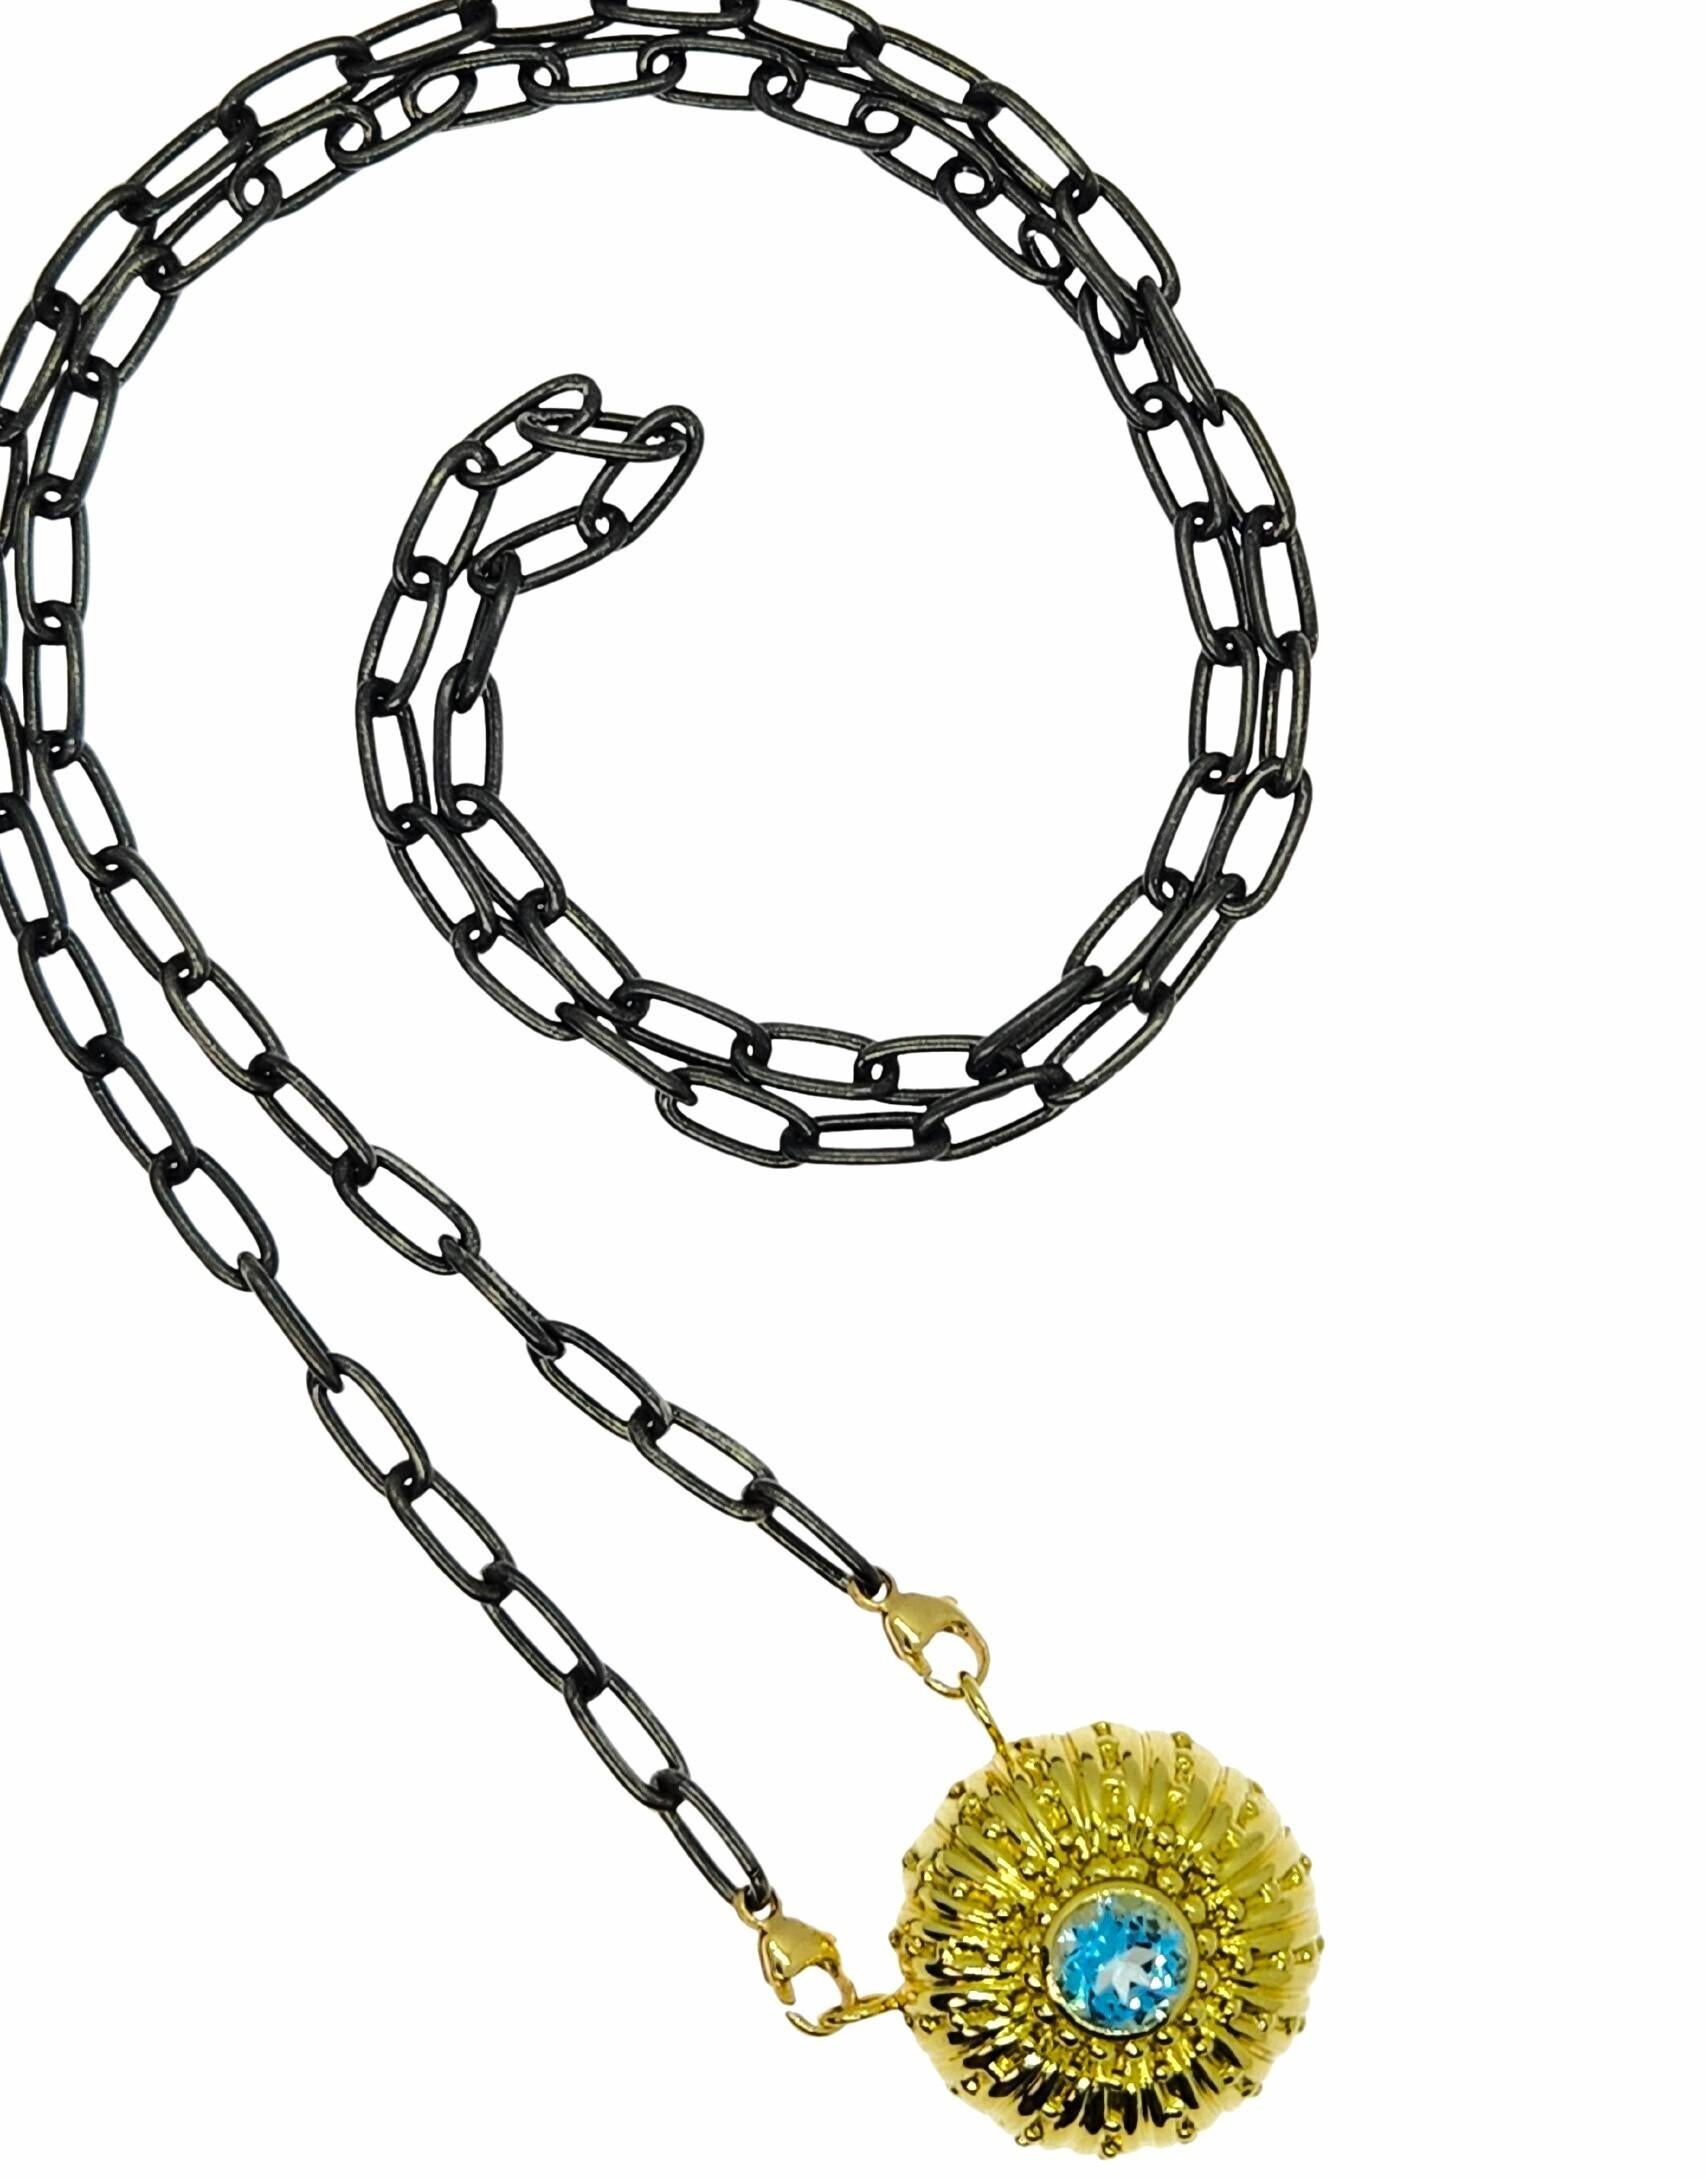 Contemporary Textured Sea Urchin Necklace with Ocean Blue Topaz Center and 18K Gold Necklace For Sale